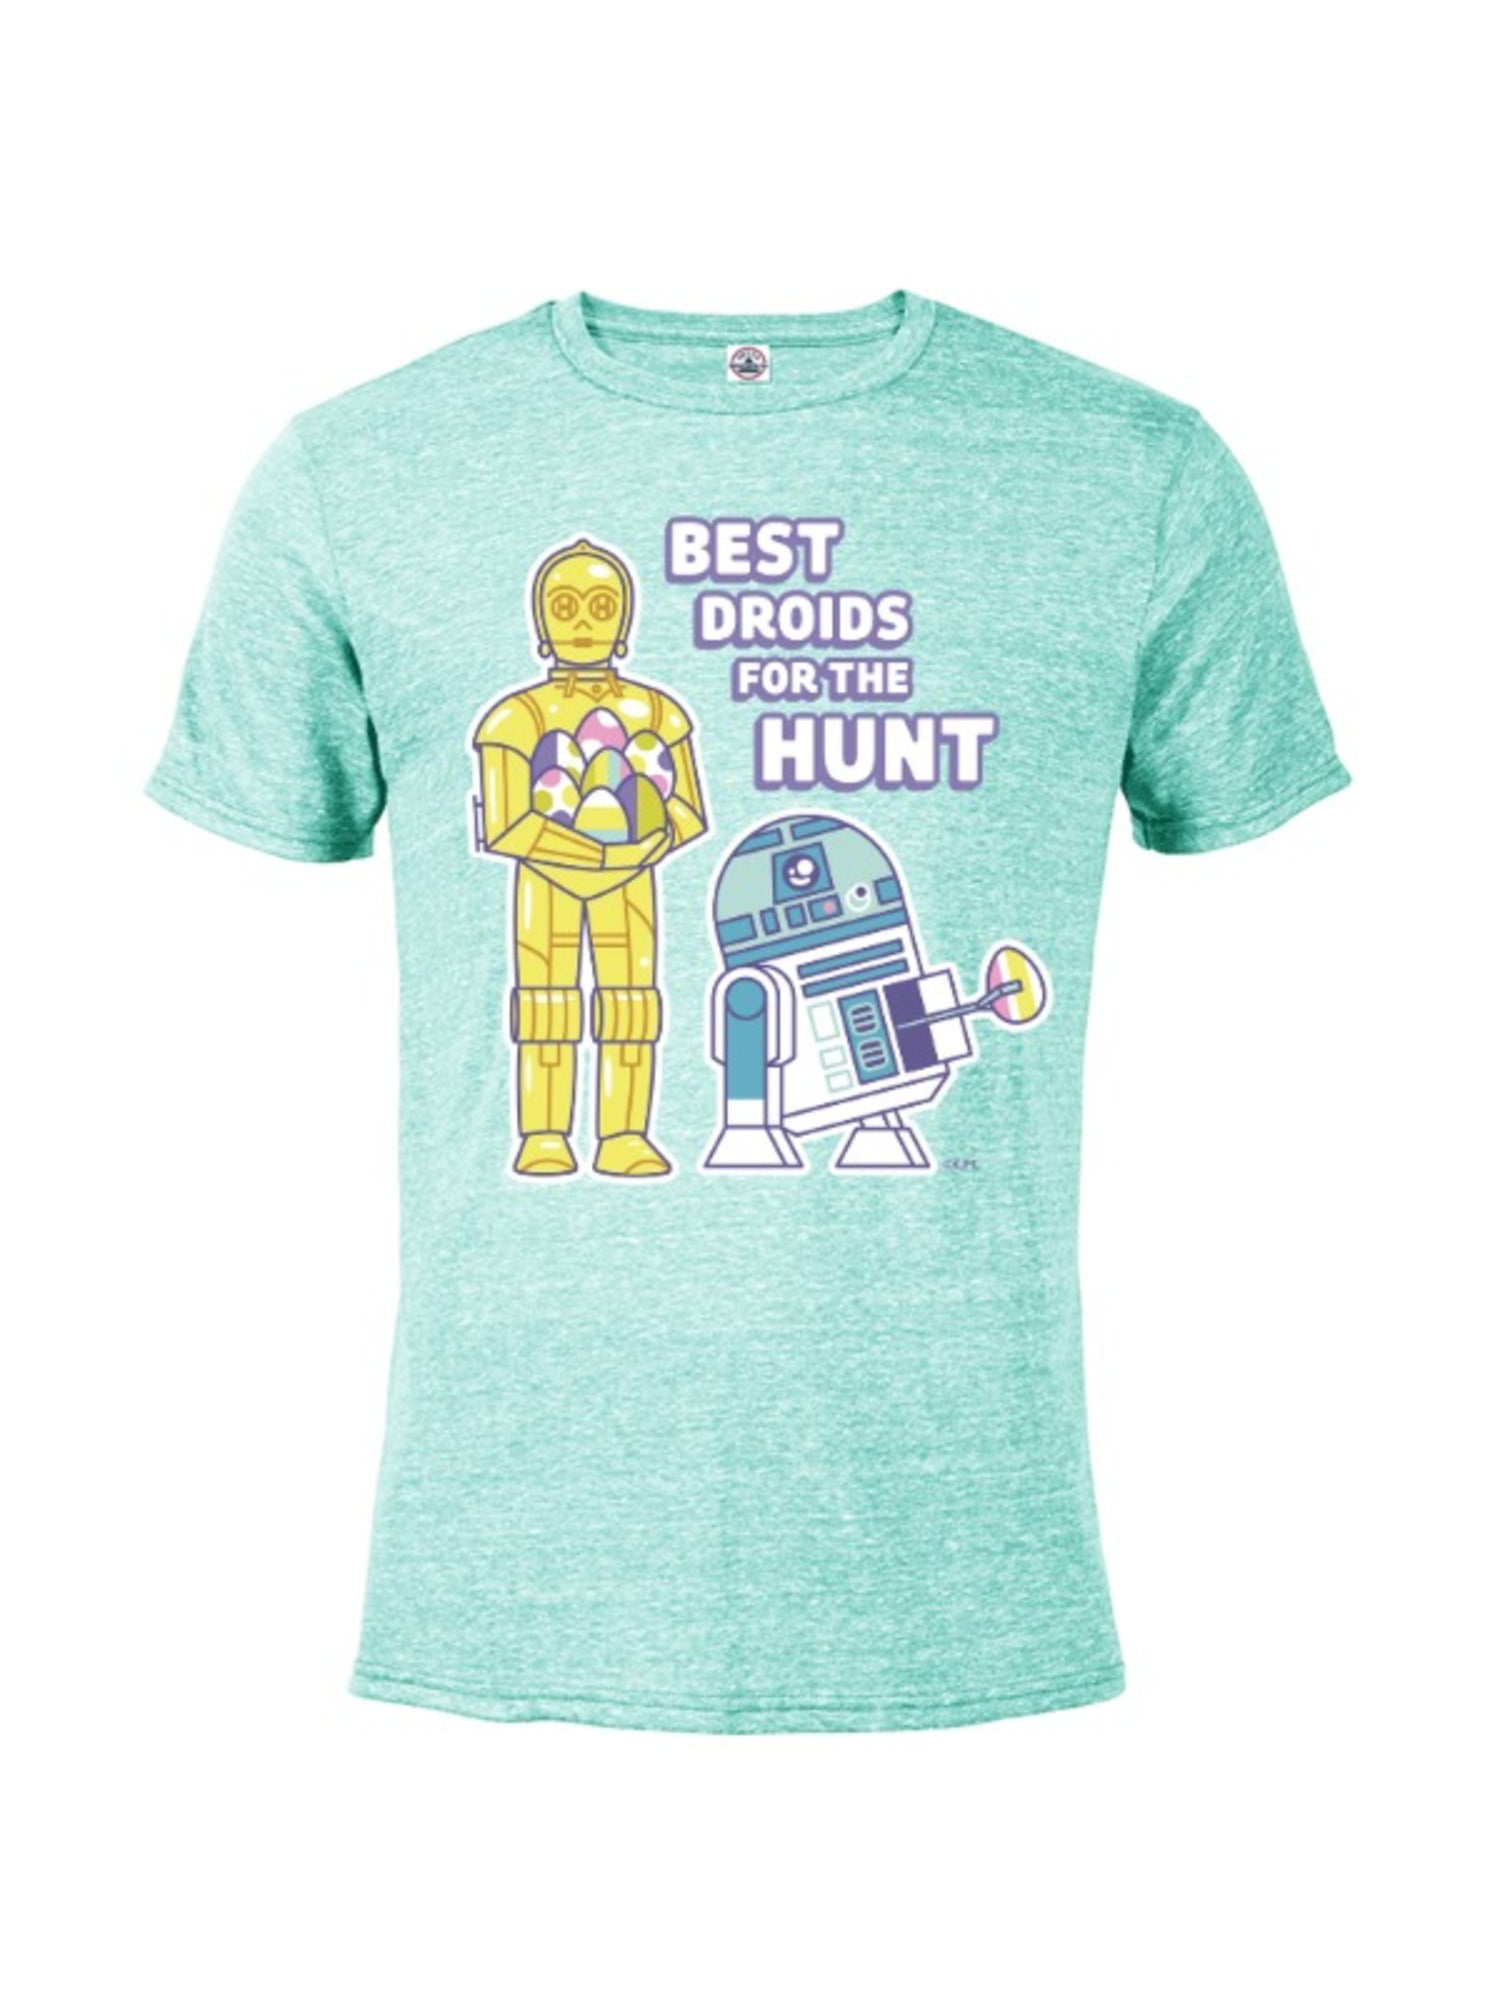 Star Wars Best Droids For the Hunt Easter T-Shirt Unisex Adult T-shirt Kid shirt Gift for Birthday Hoodie Sweatshirt Toddler Tee